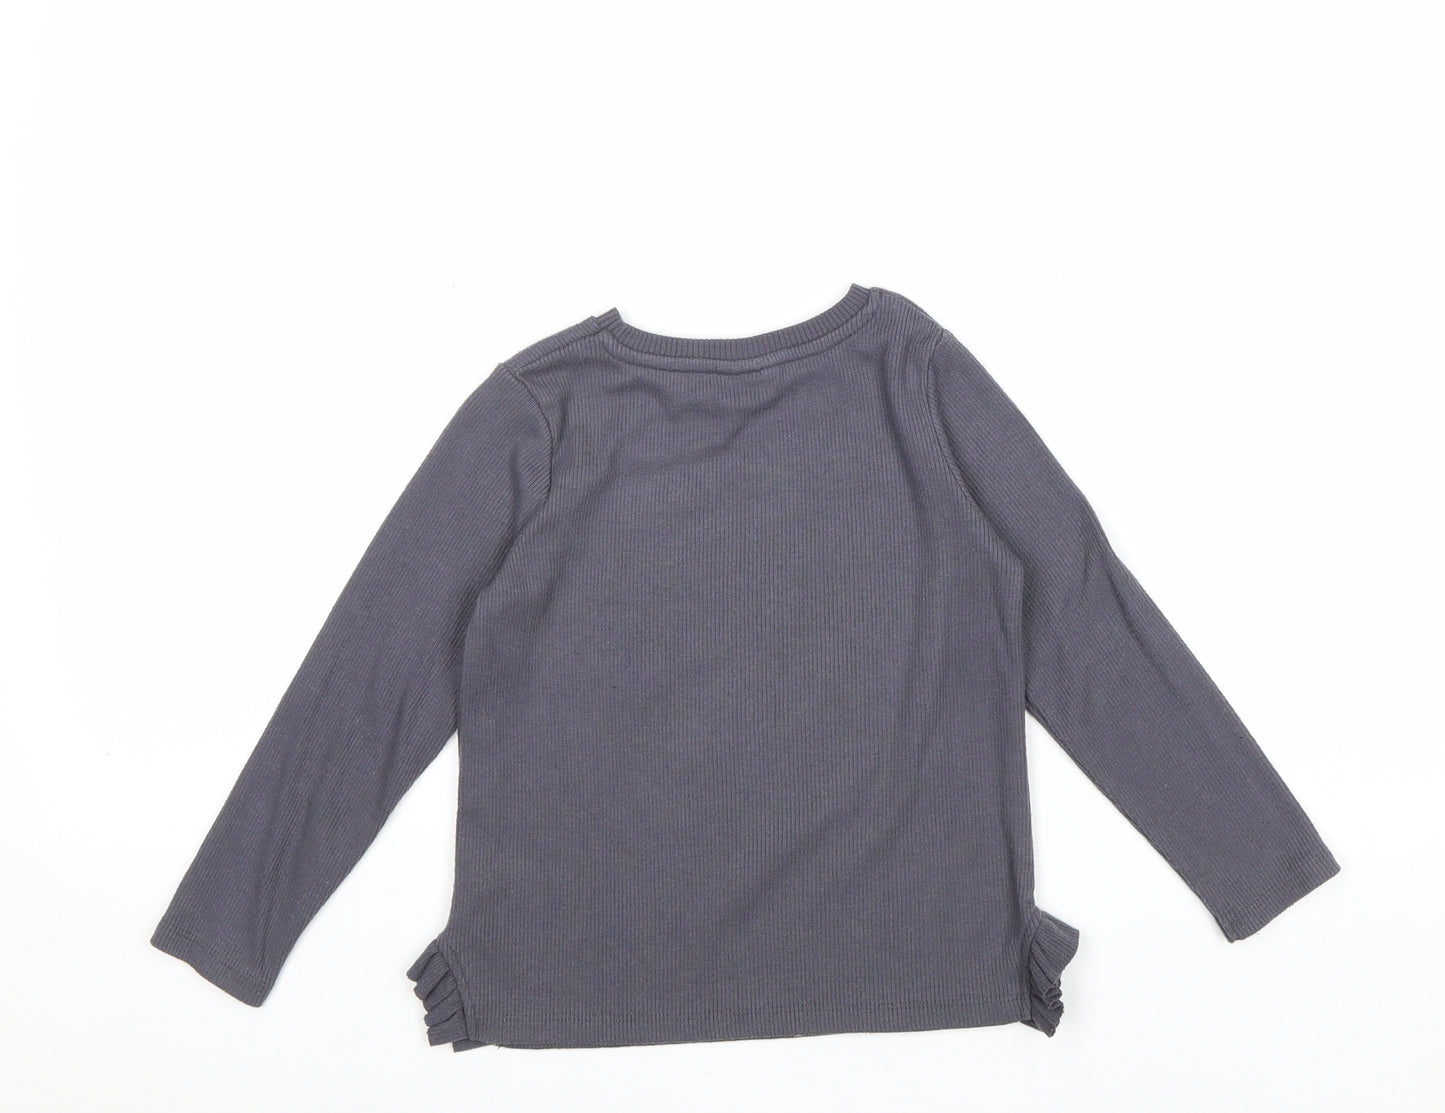 George Girls Grey Polyester Basic T-Shirt Size 4-5 Years Round Neck Pullover - Minnie Mouse